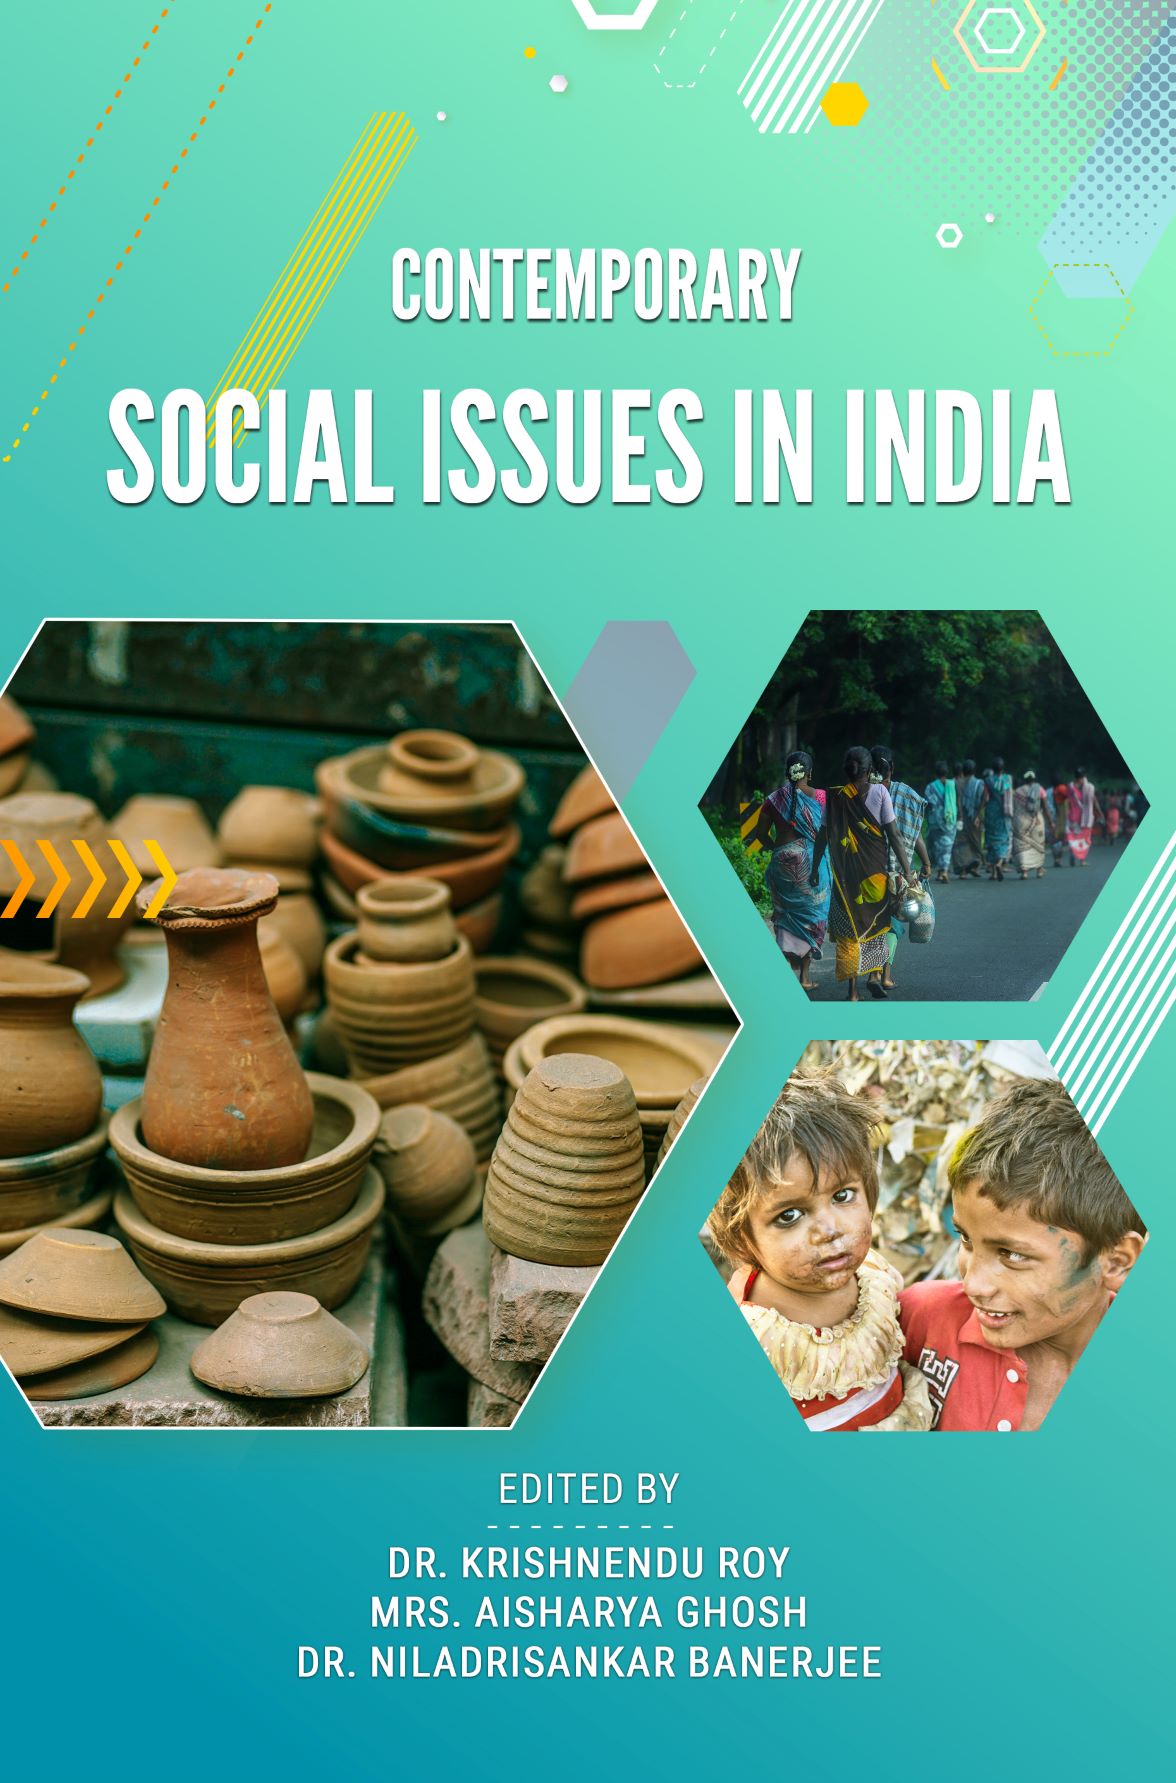 short case study on social issues in india